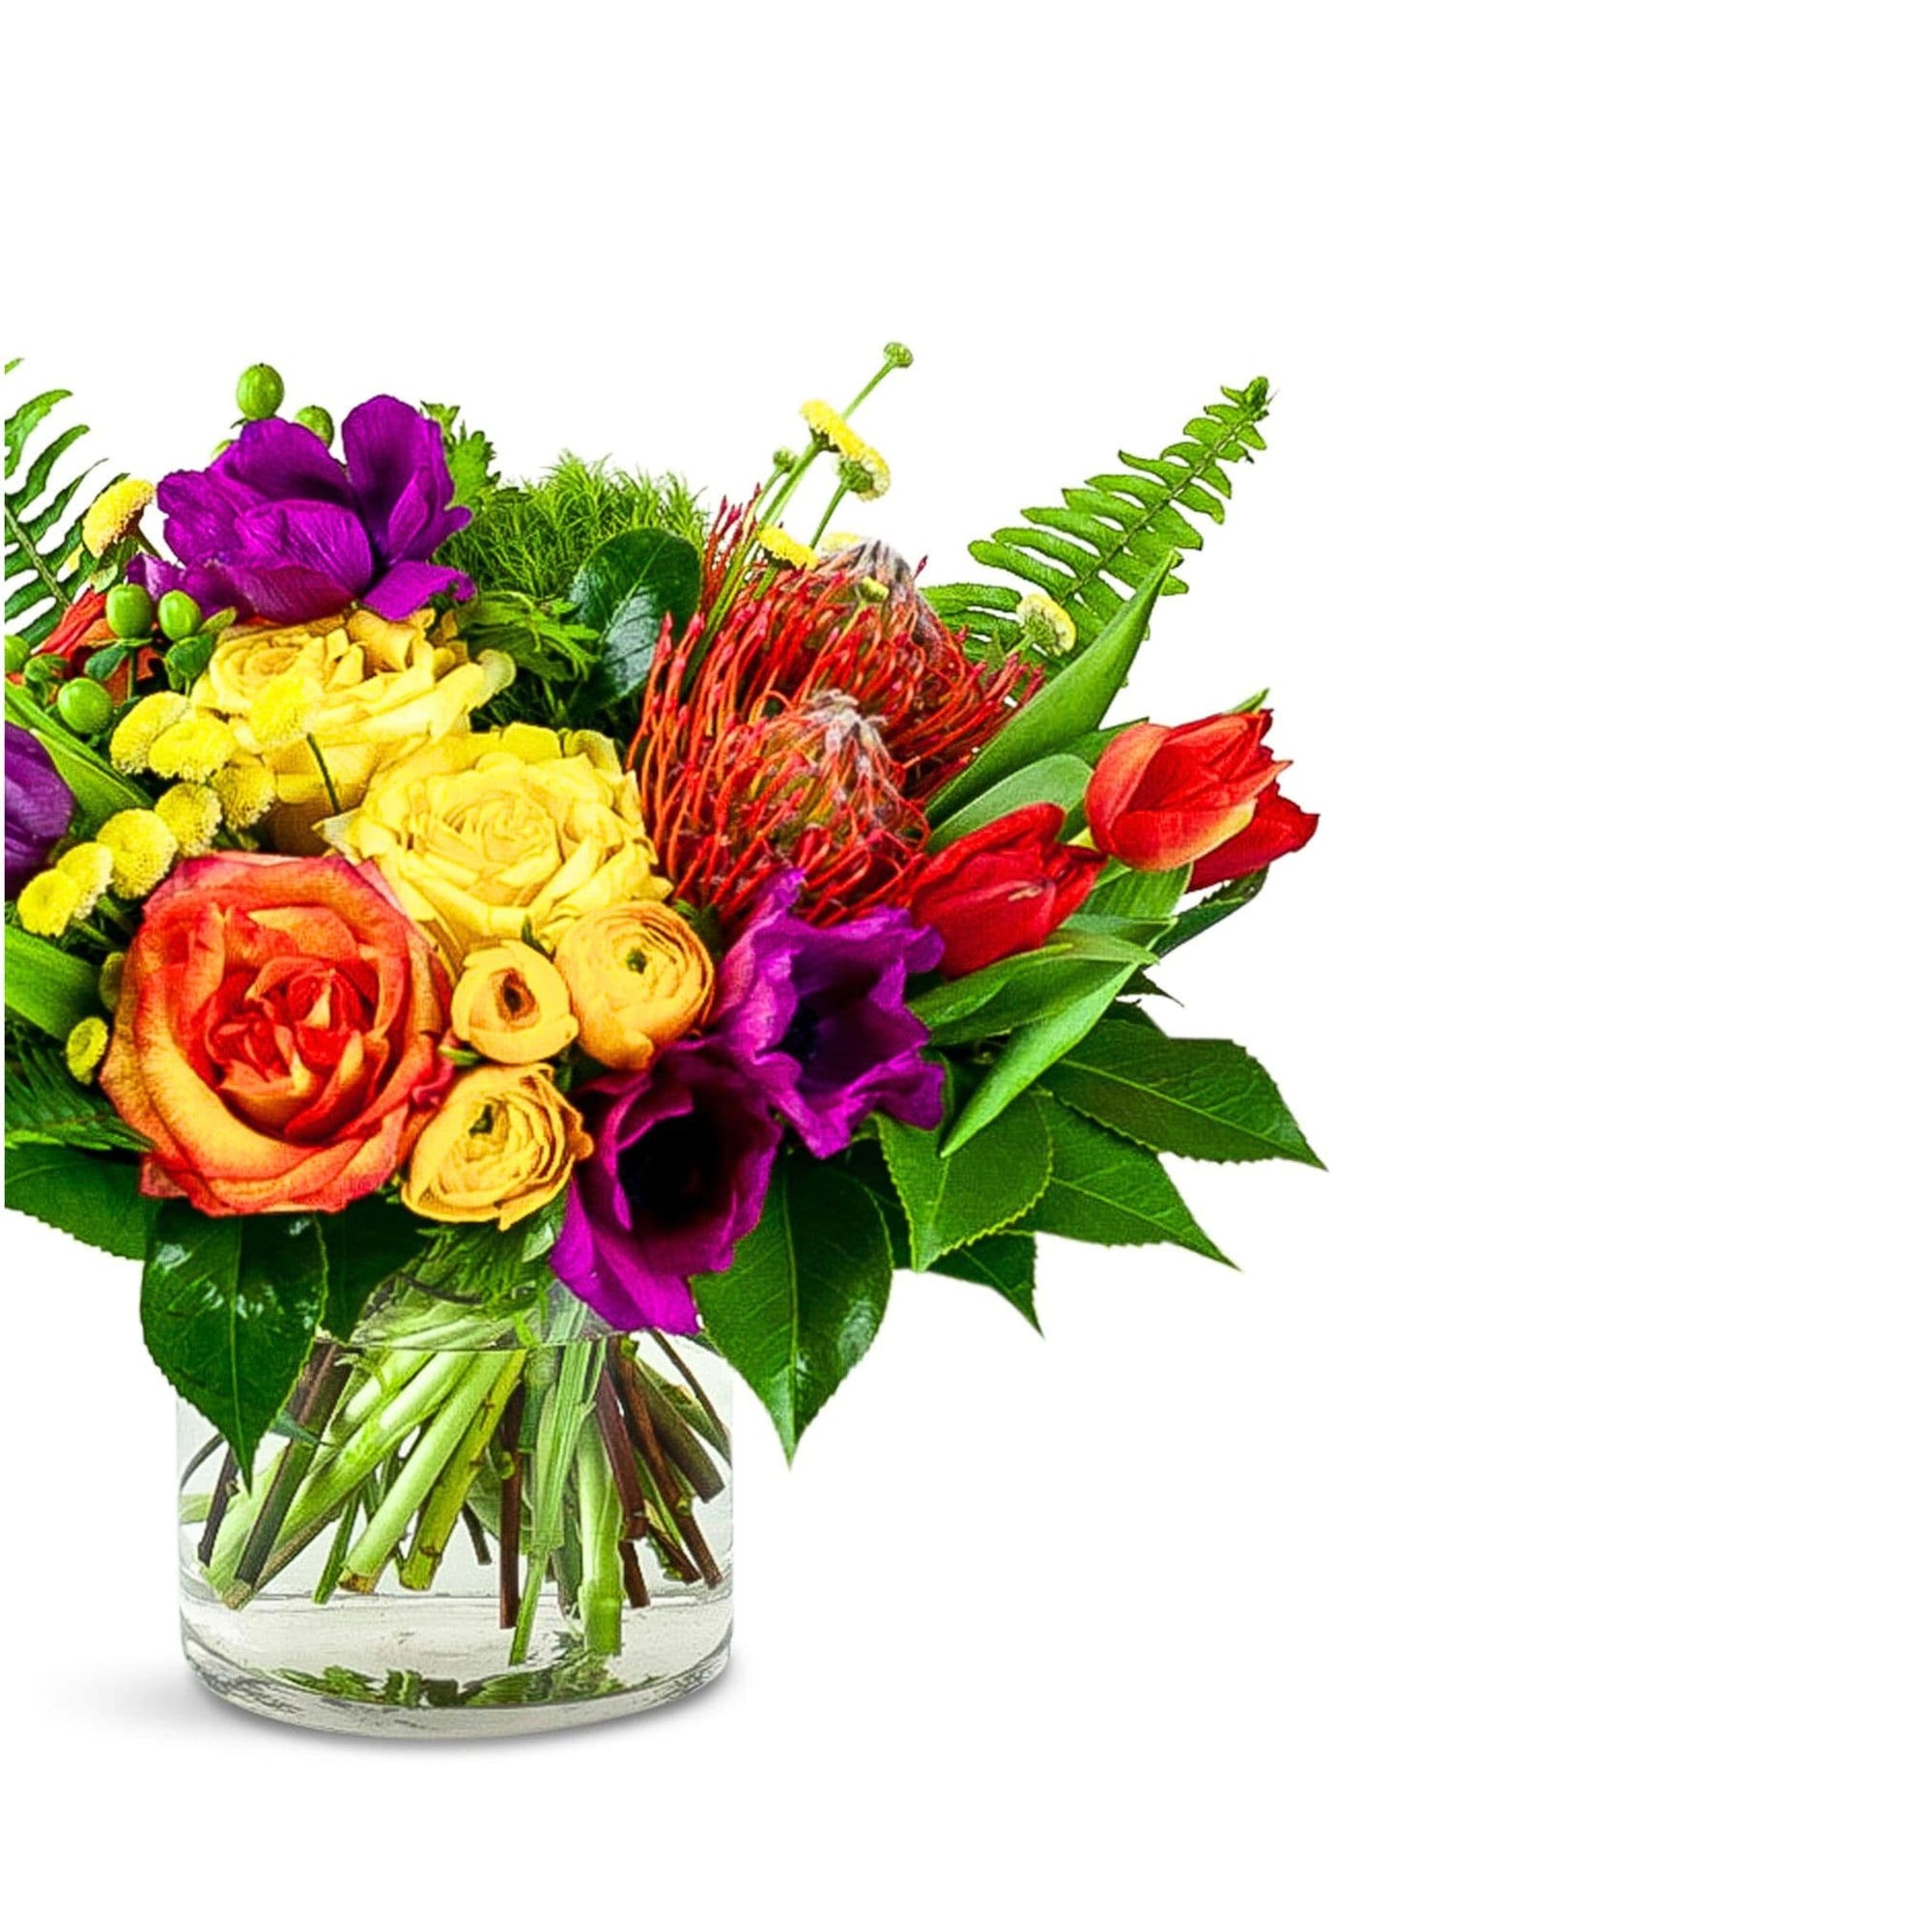 Bright Seasonal Floral from Green Fresh Florals + Plants